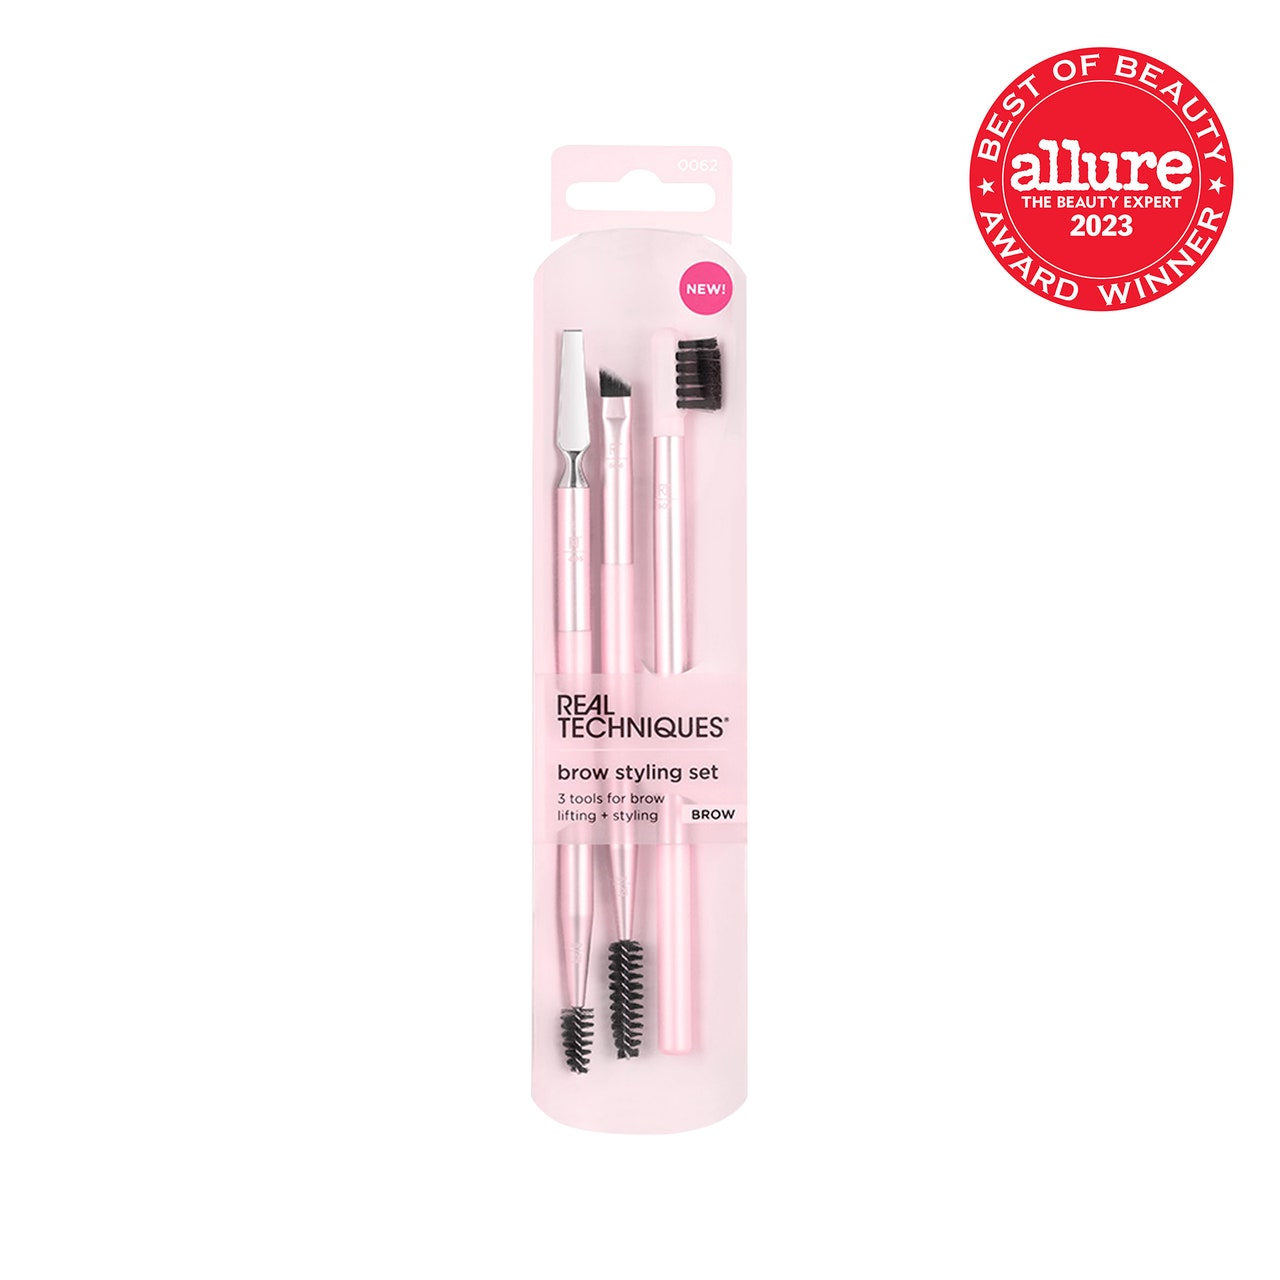 Real Techniques Brow Styling Set package of pale pink eye brow brushes on white background with red Allure BoB seal in the top right corner